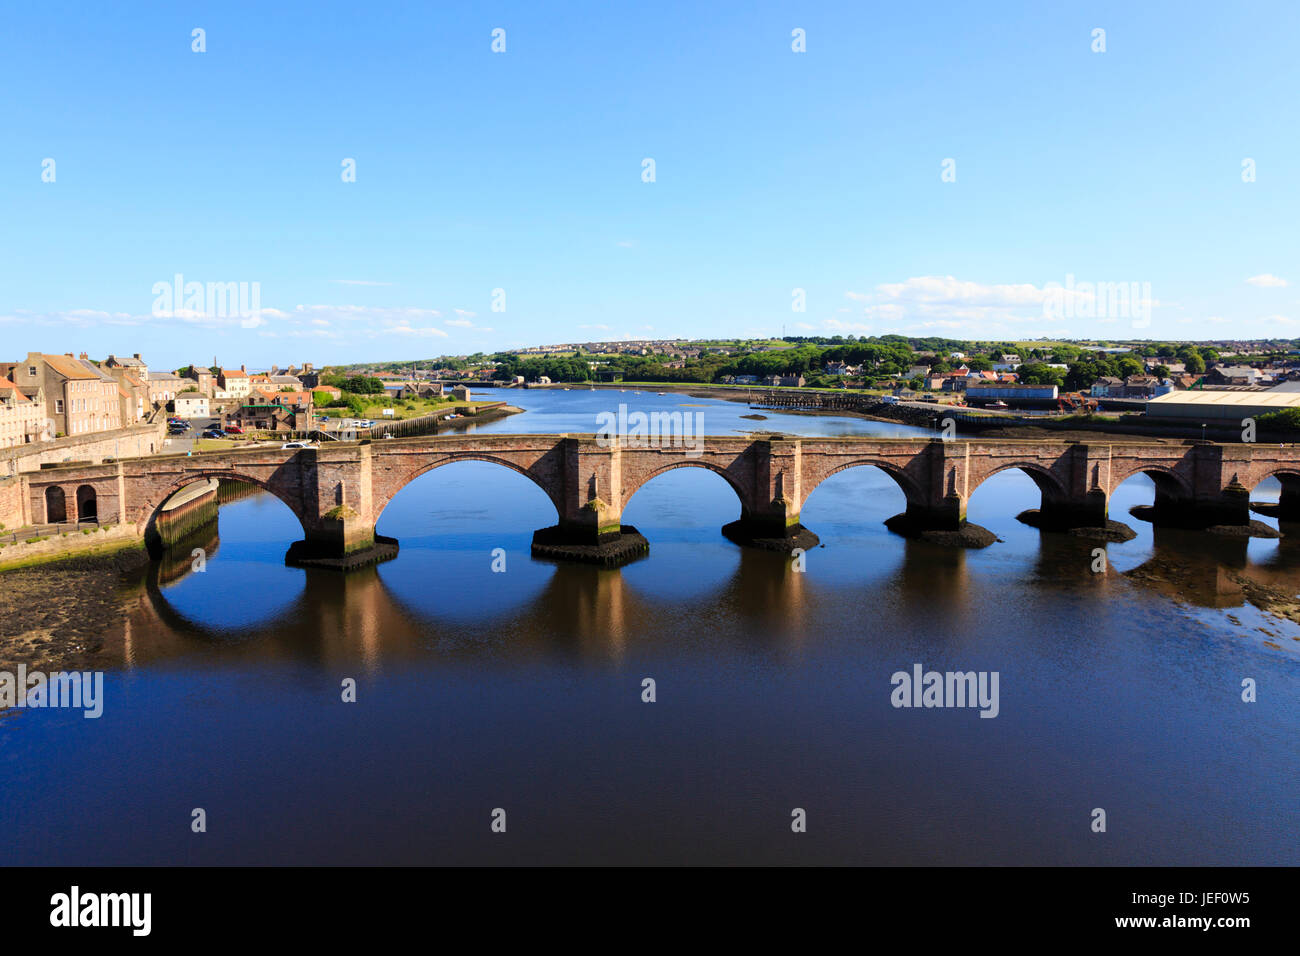 The Old Bridge, Berwick upon Tweed. Englands most northerly town. Stock Photo